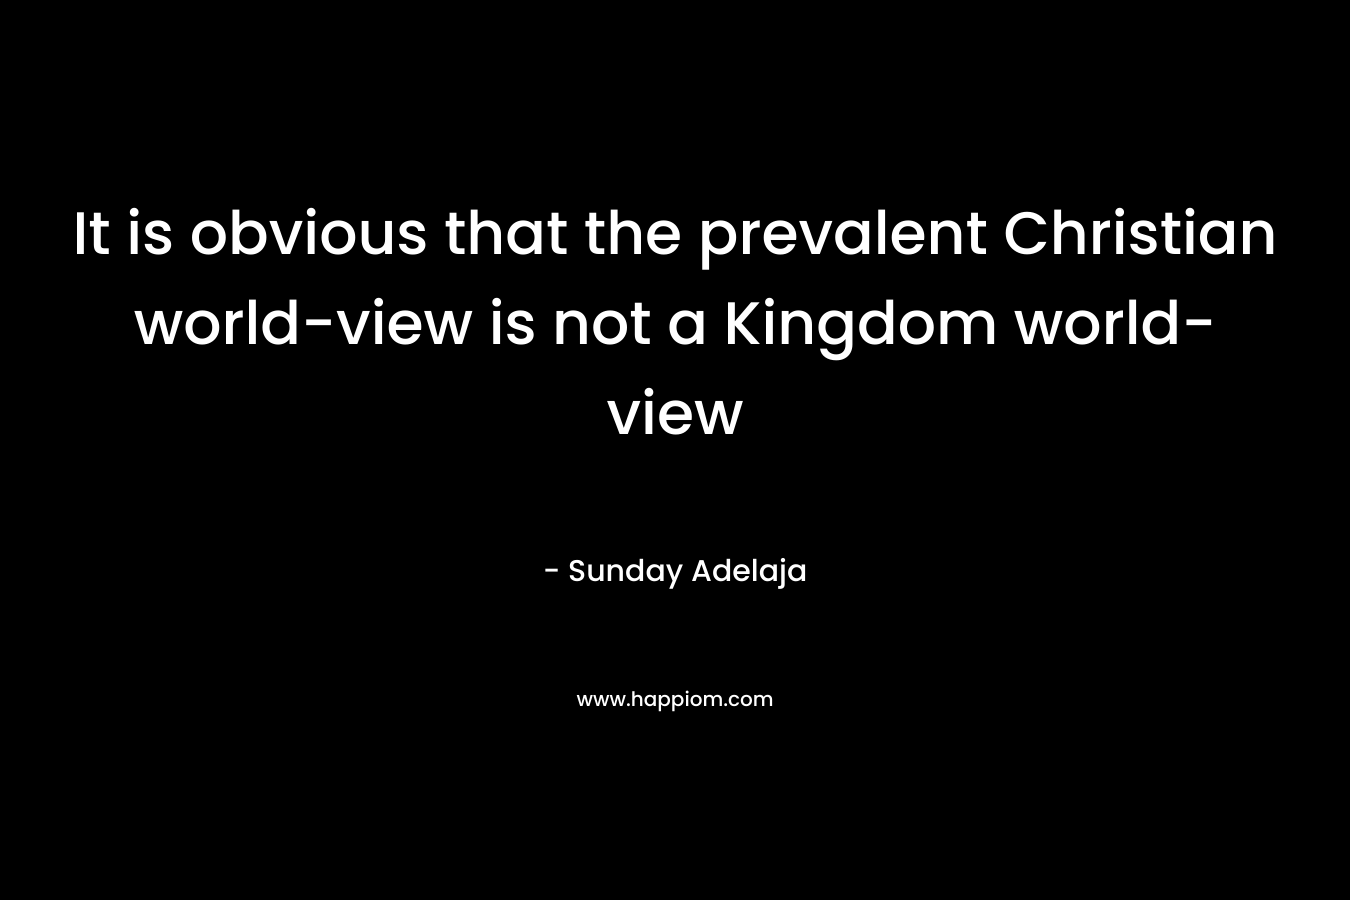 It is obvious that the prevalent Christian world-view is not a Kingdom world-view – Sunday Adelaja